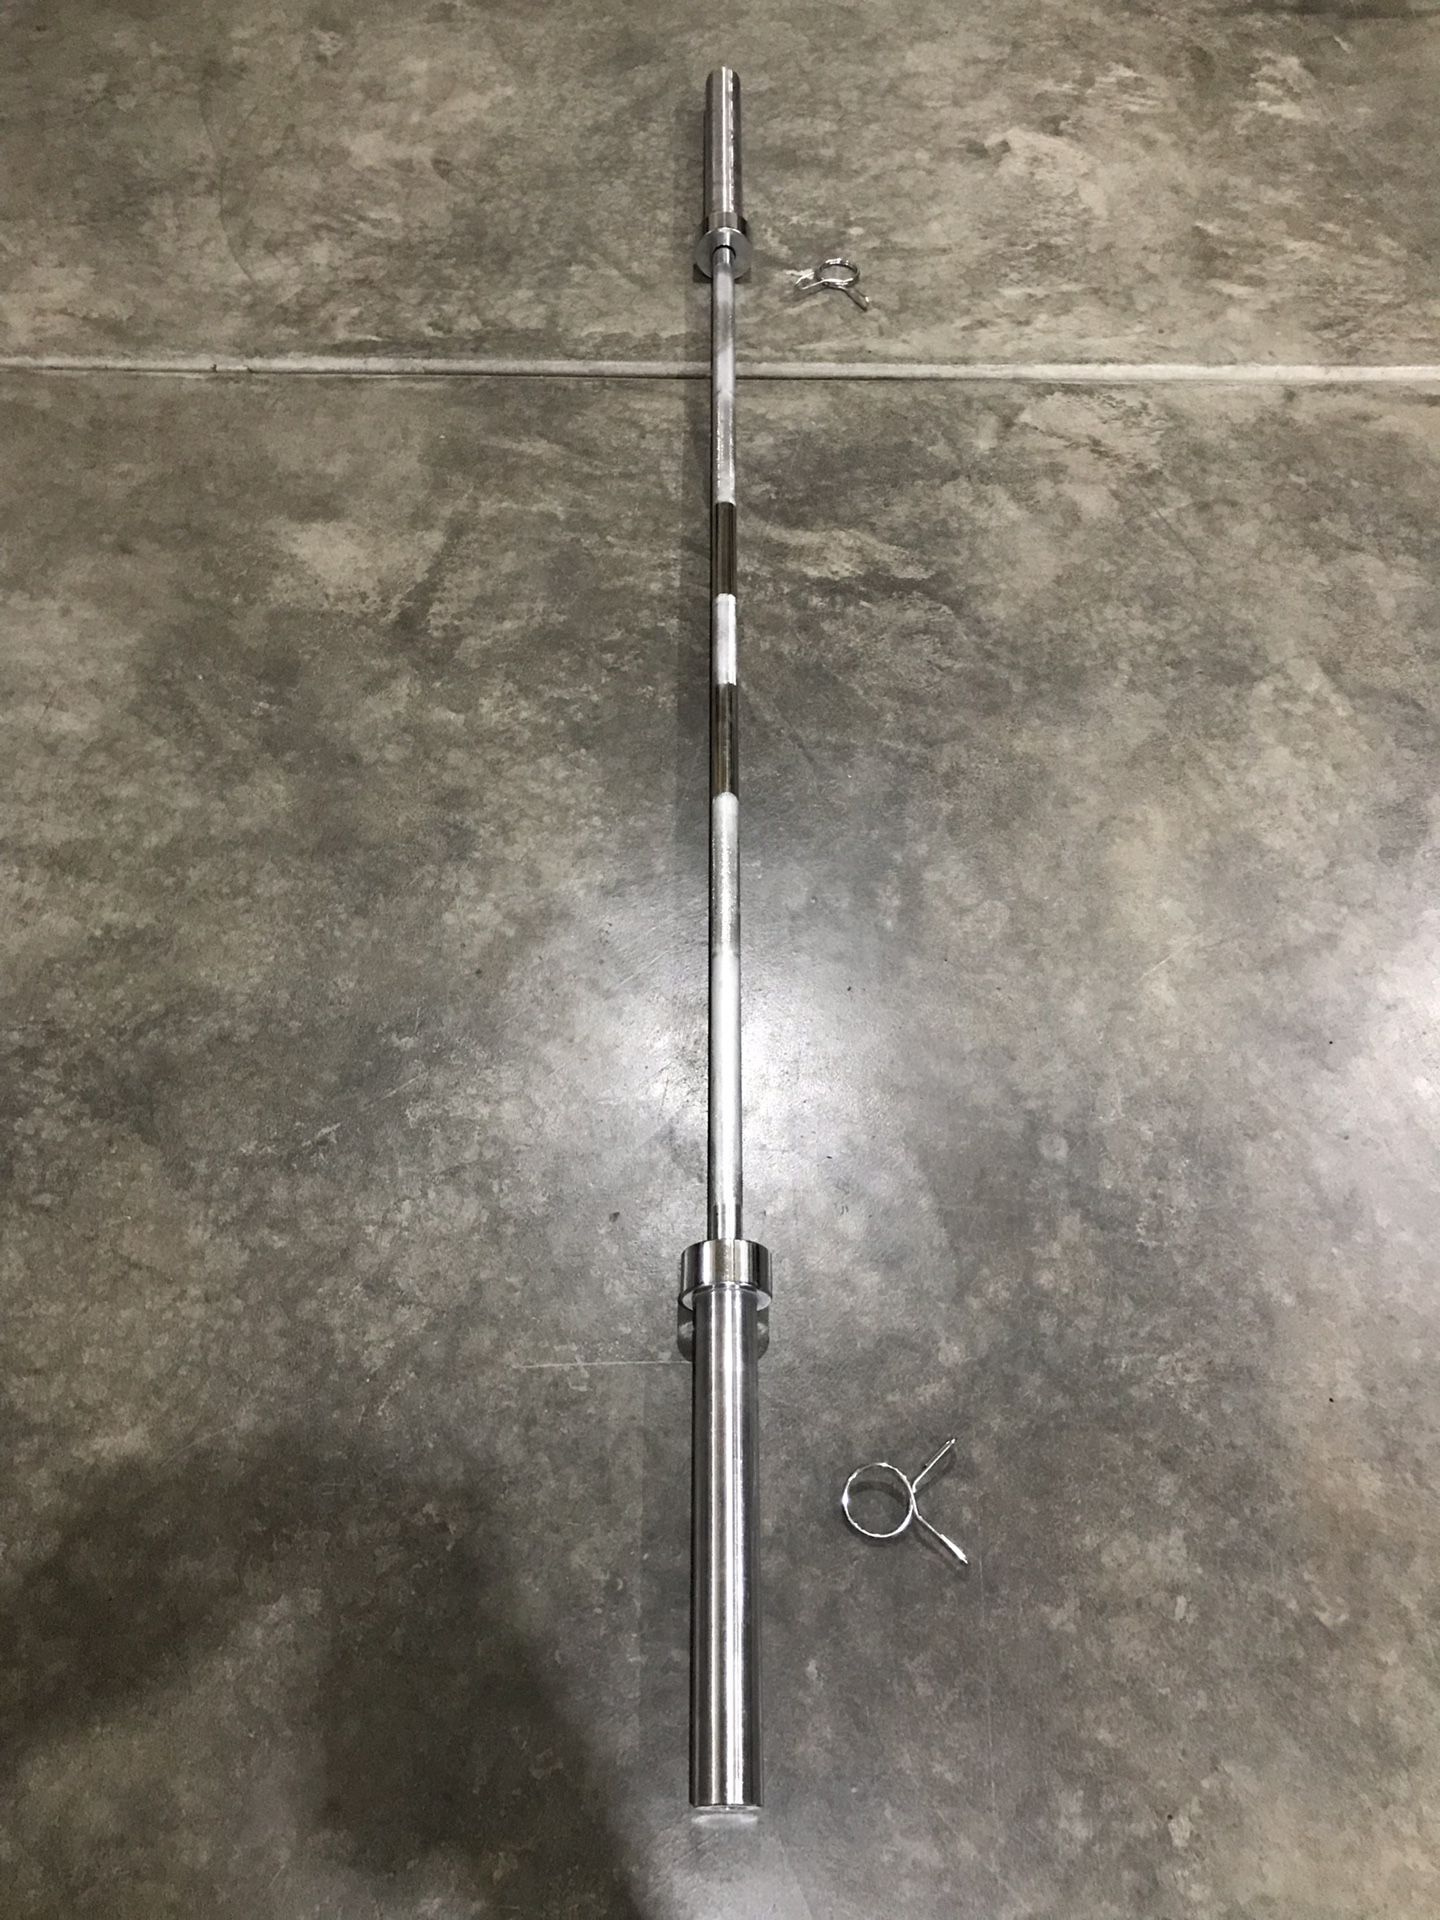 *Pending* 45lb Olympic Bar with clips